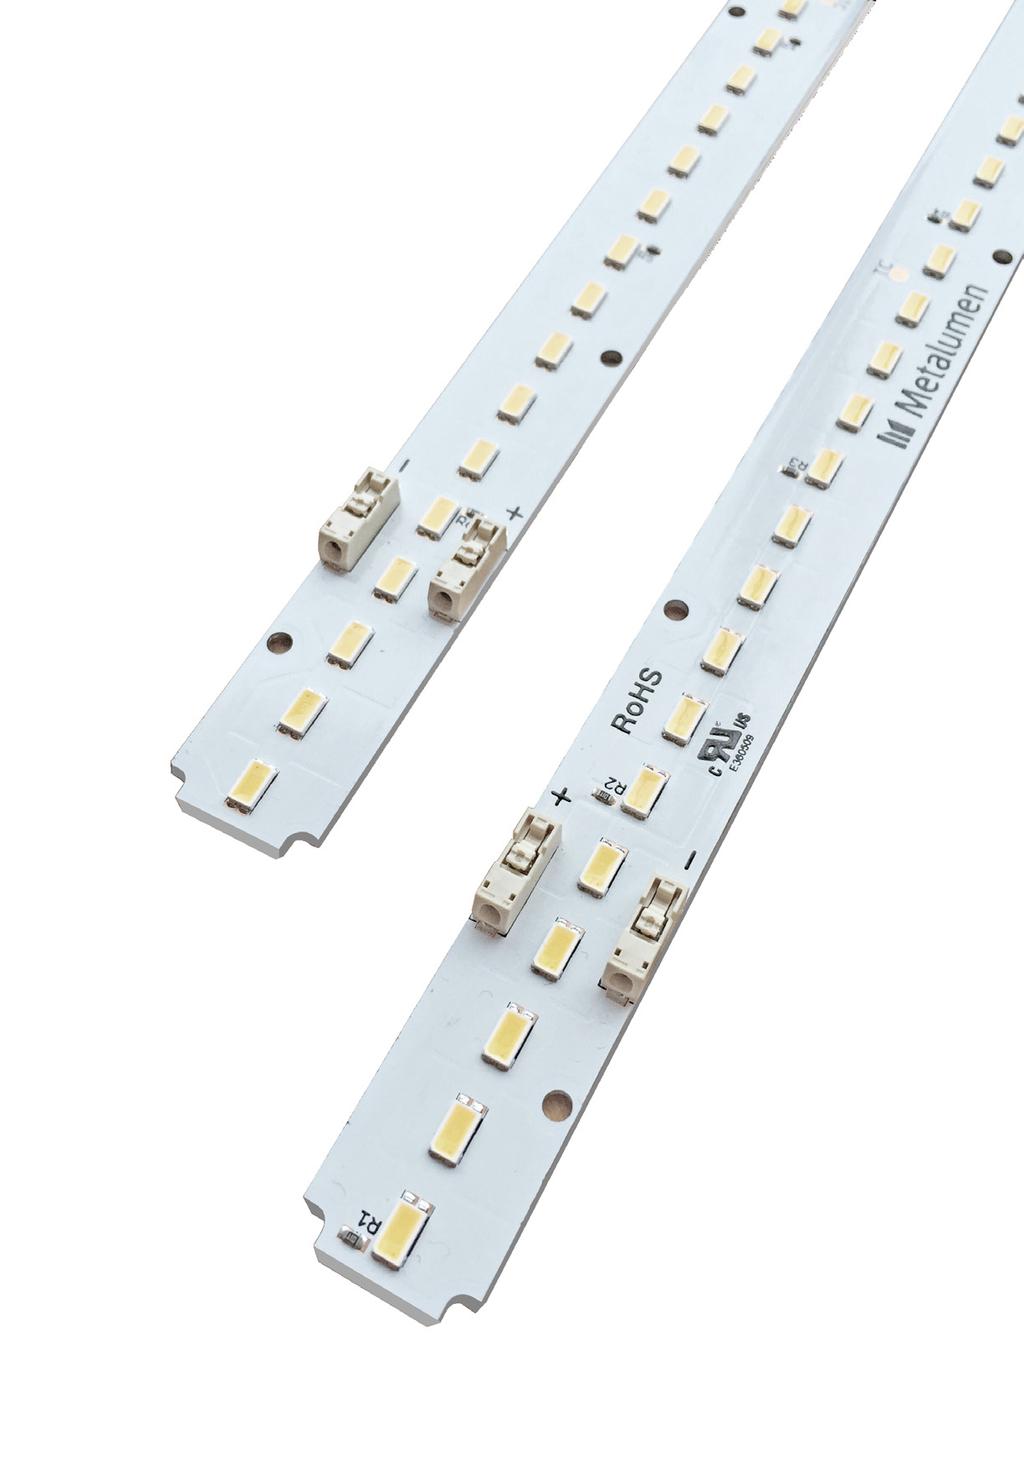 A4S BEYOND SWITCHING FROM FLUORESCENT TO LED APPROACH A4P A4PI With building code standard improving, luminaires today struggle to meet the criteria necessary for the modern office environment and